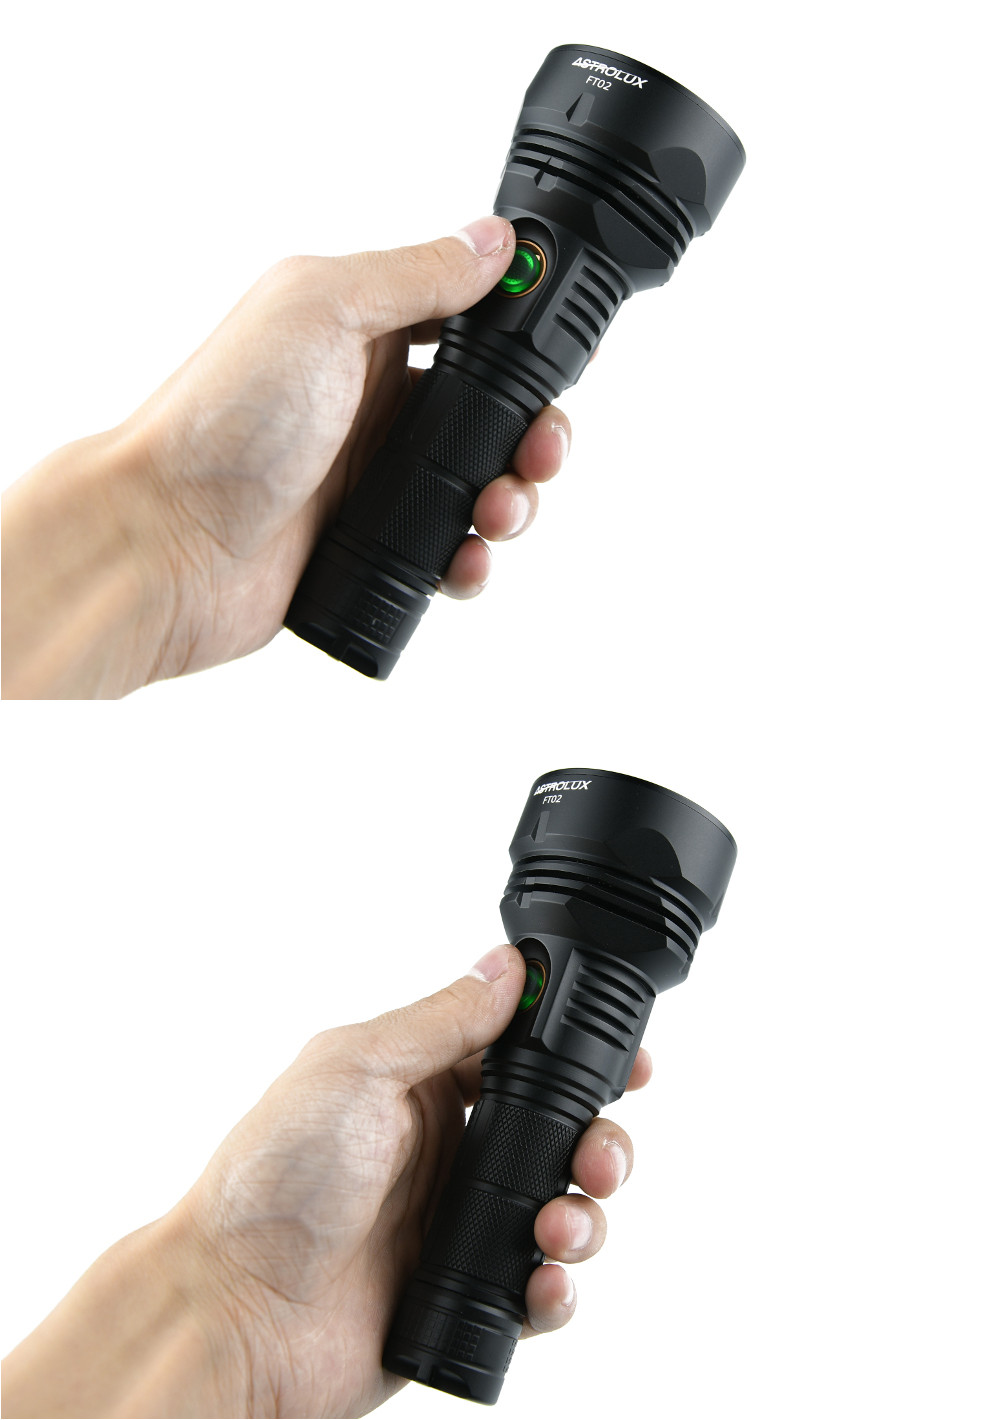 Astrolux-FT02-XHP35-HI-2200LM-Stepless-Dimming-USB-Rechargeable-Military-LED-Torch-High-Powerful-Hig-1375372